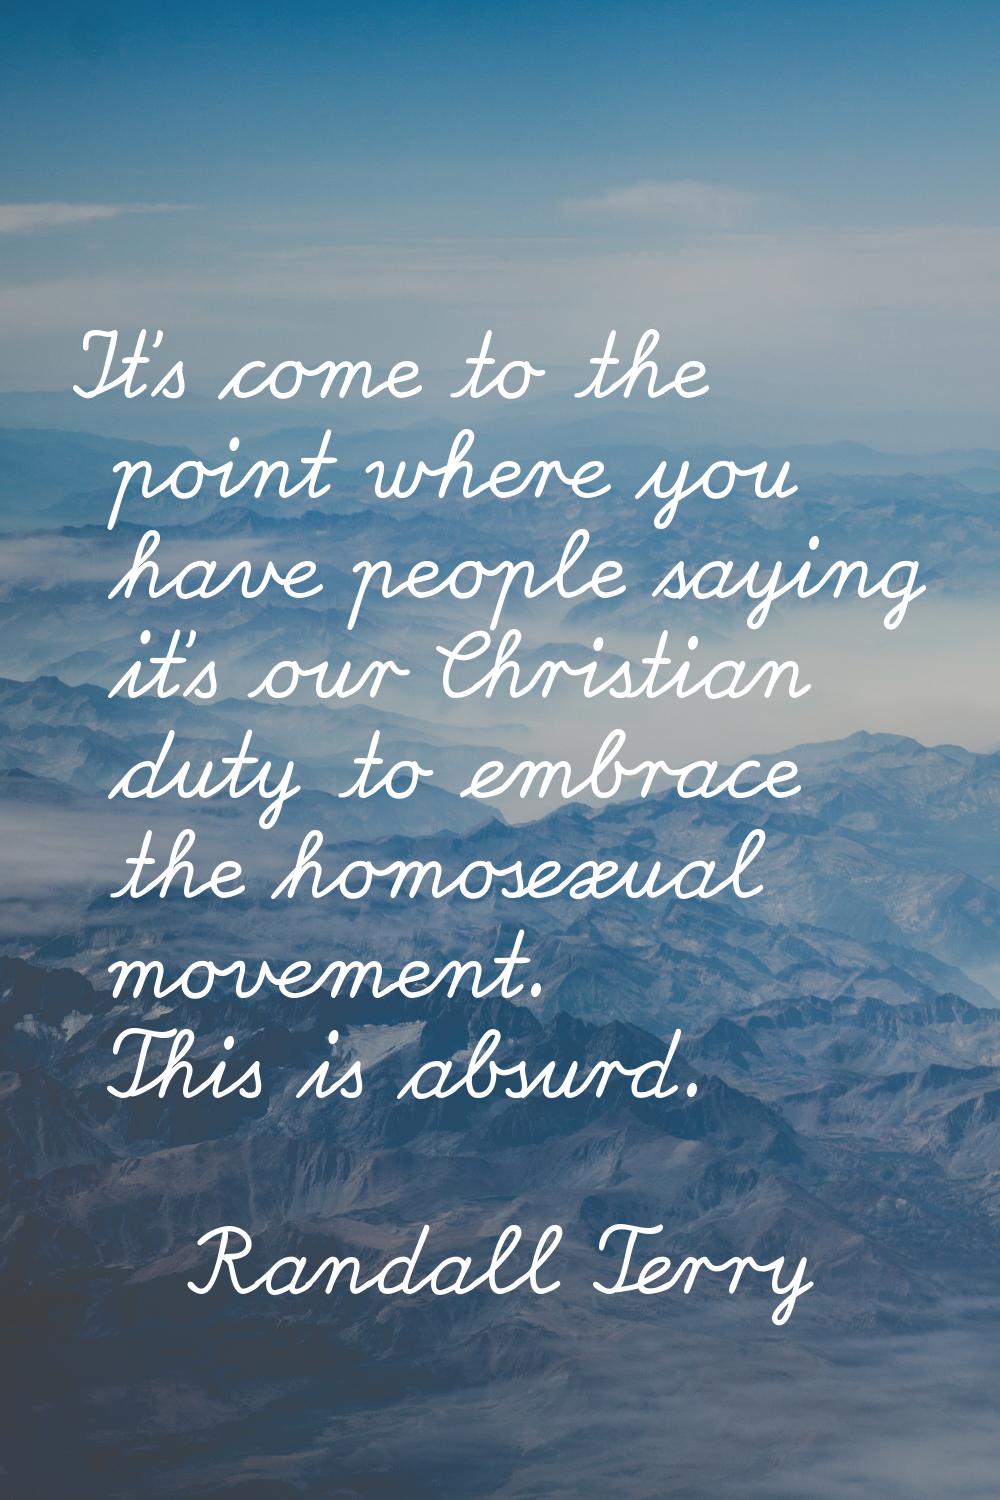 It's come to the point where you have people saying it's our Christian duty to embrace the homosexu